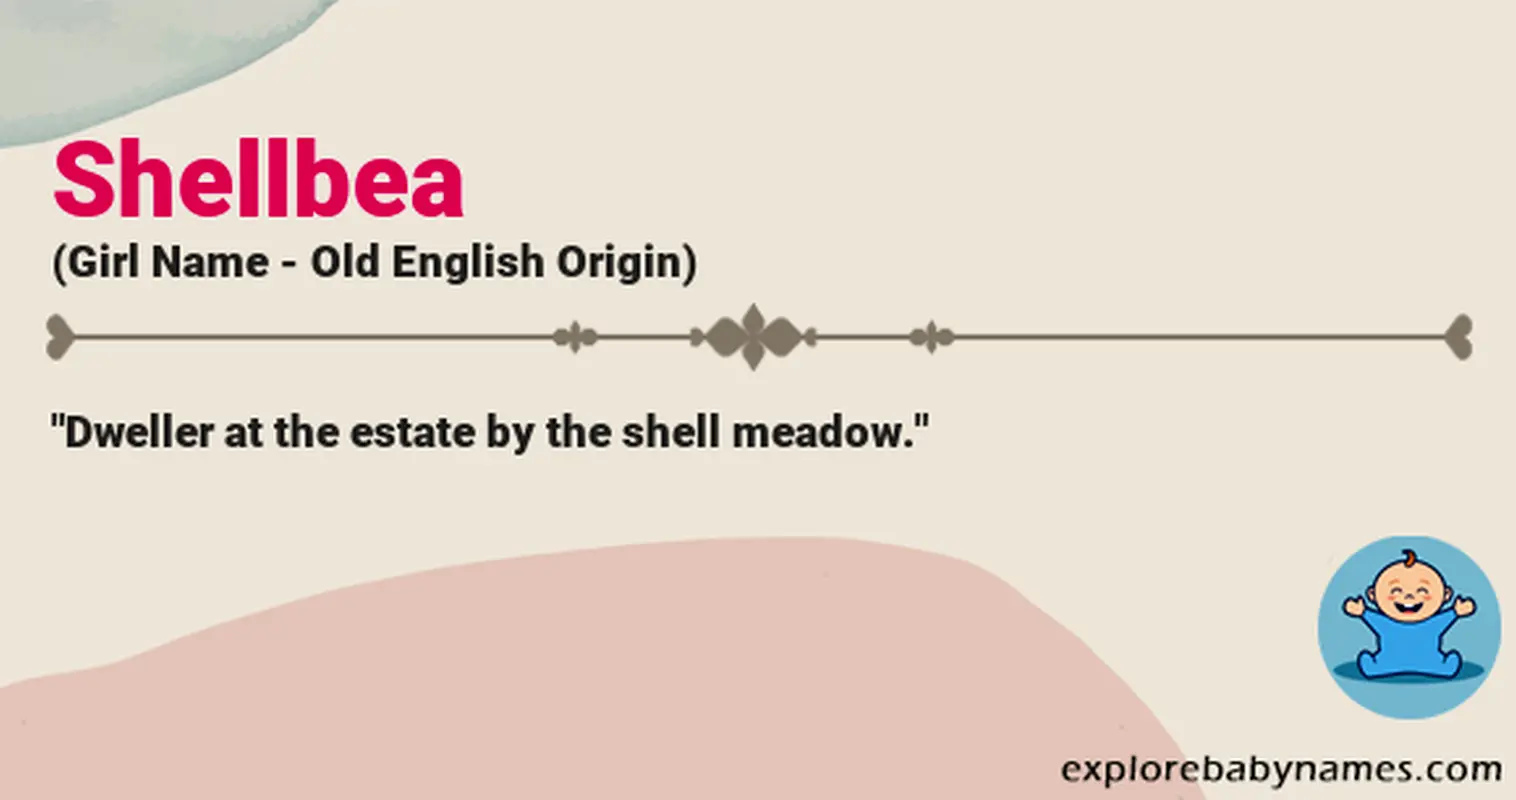 Meaning of Shellbea